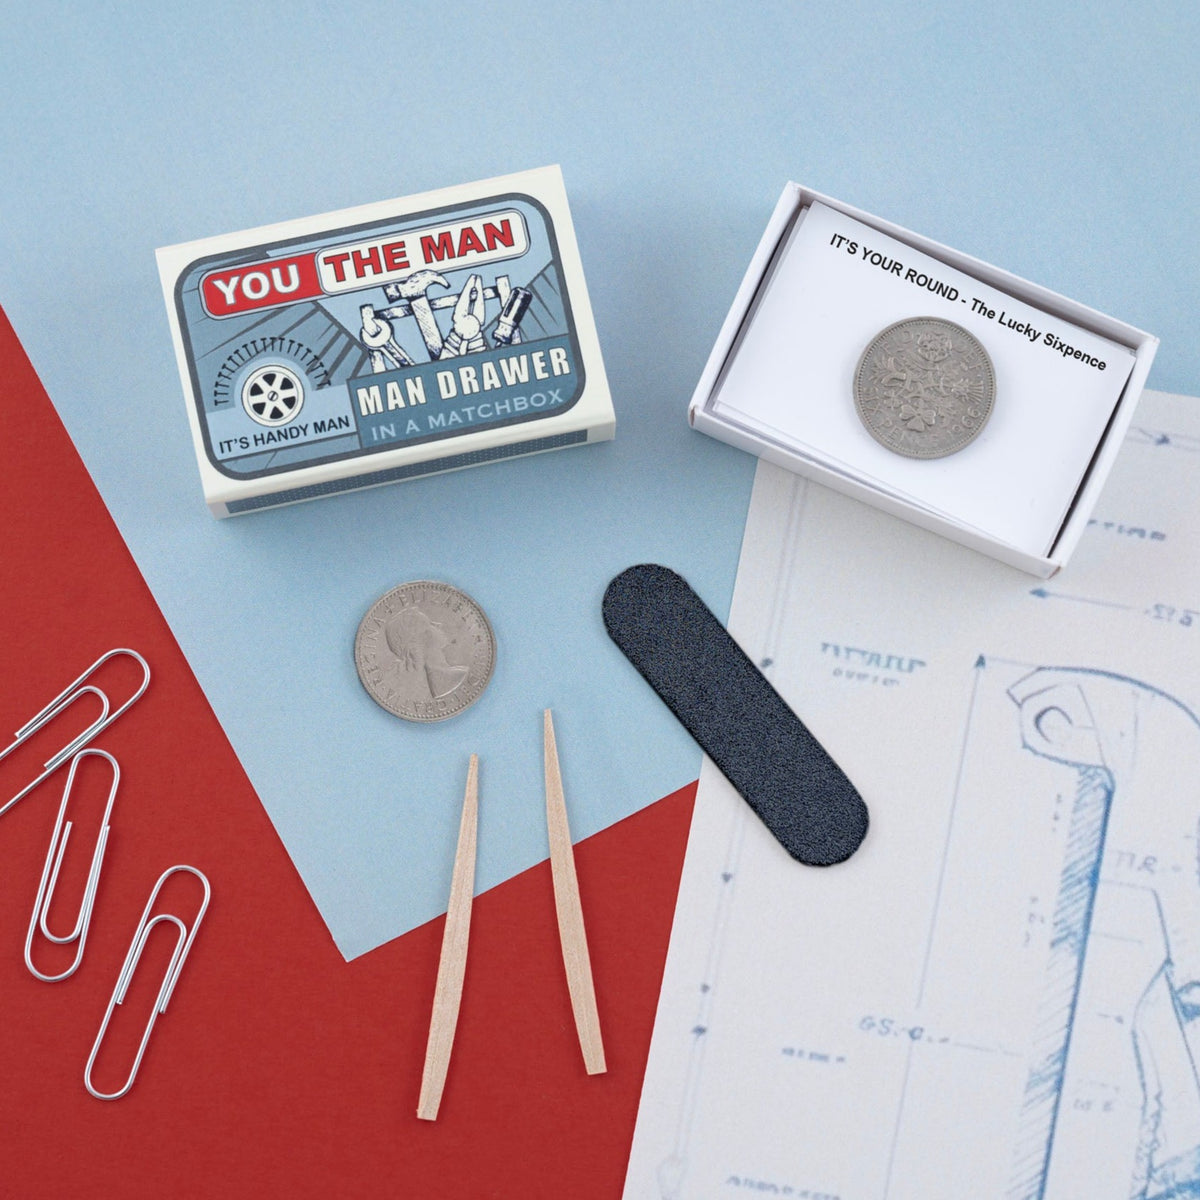 You The Man Novelty Stationary Kit In A Matchbox